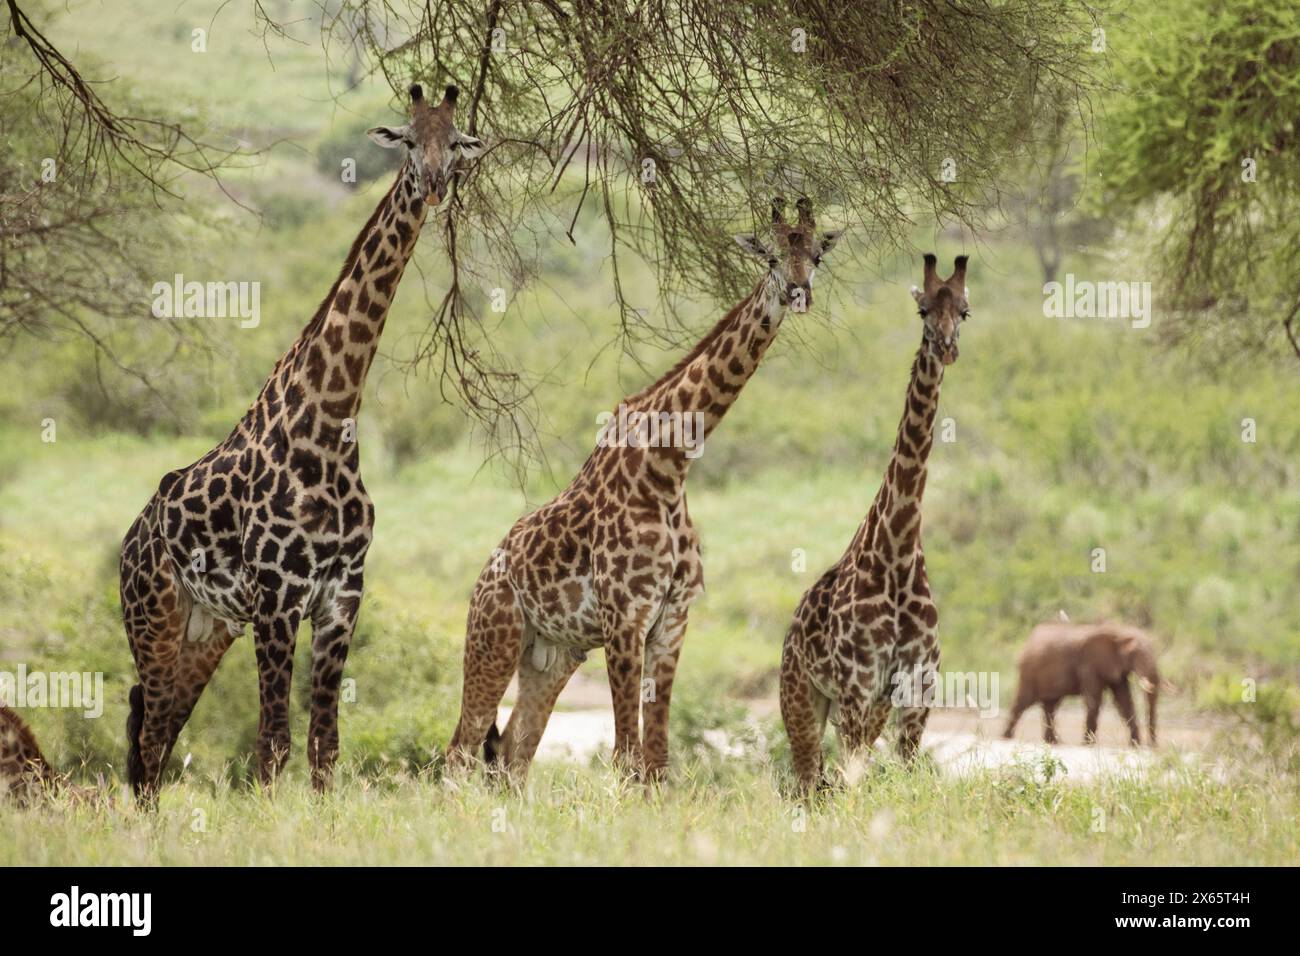 A bunch of giraffes take notice of the photographer, taking a br Stock Photo